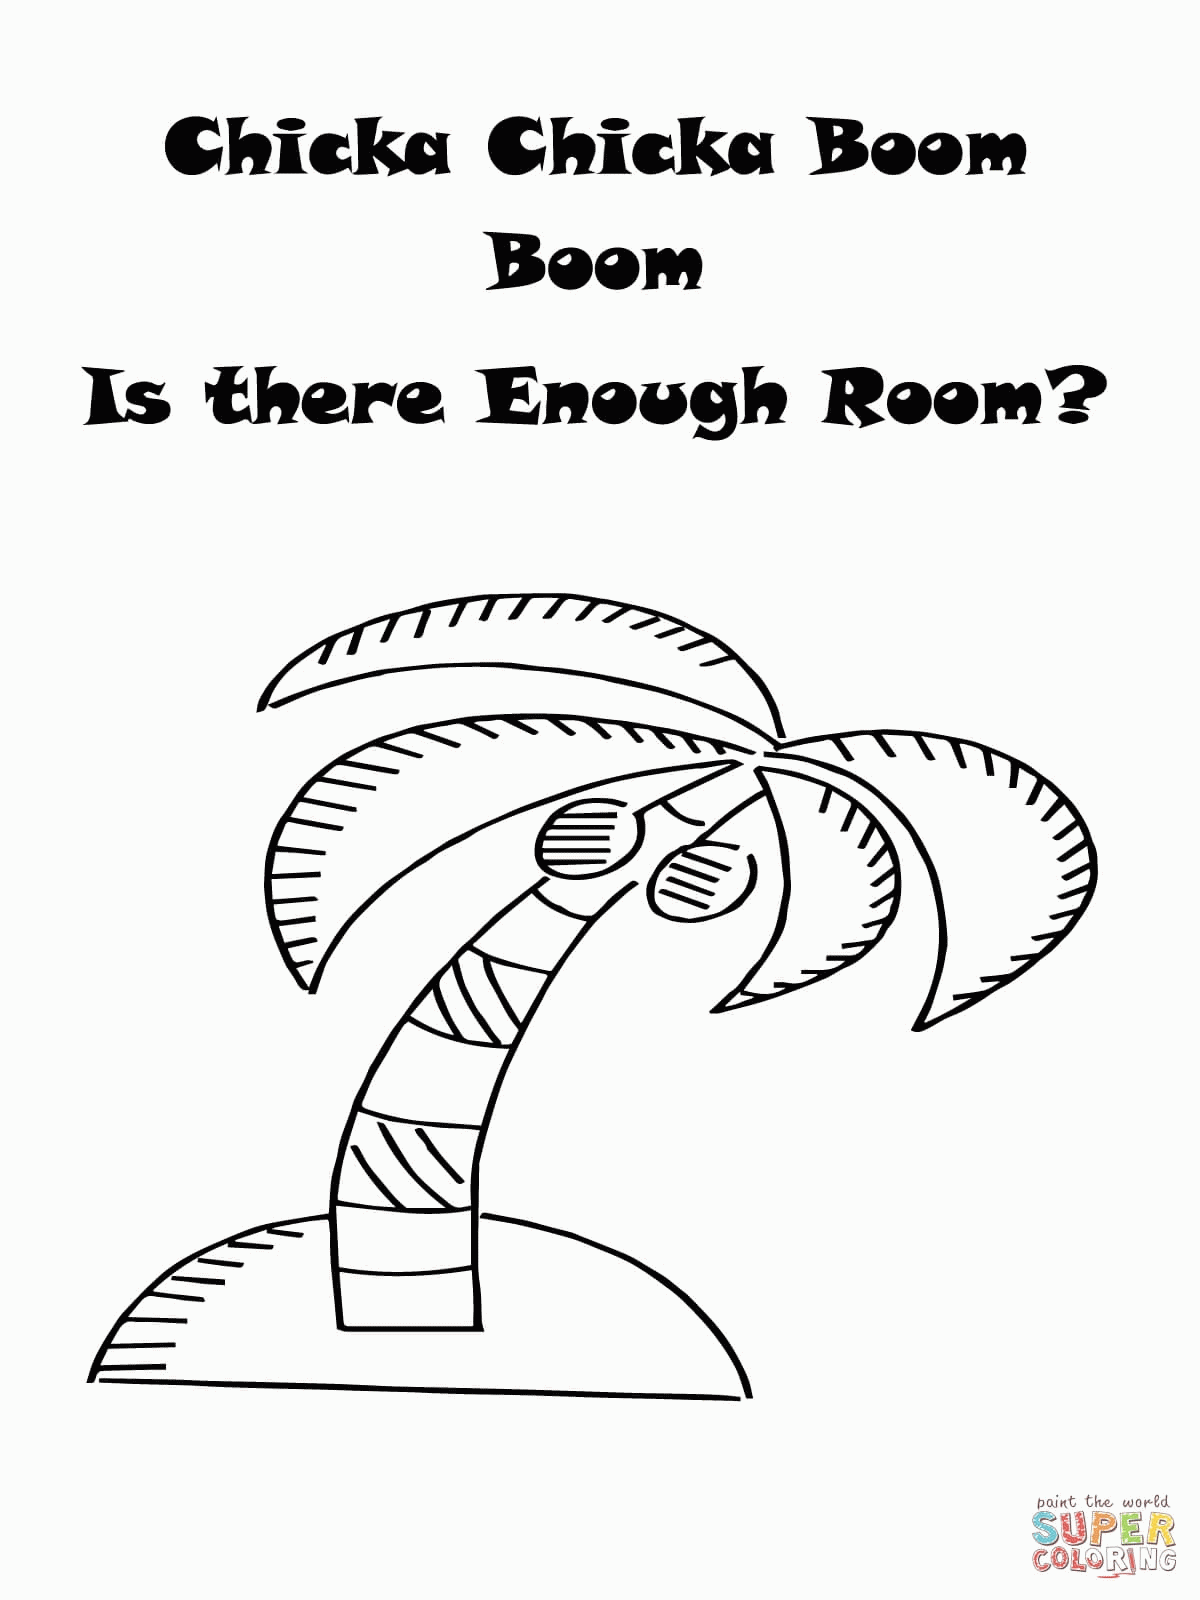 Shape Chicka Chicka Boom Boom Coloring Pages 2378 - Widetheme